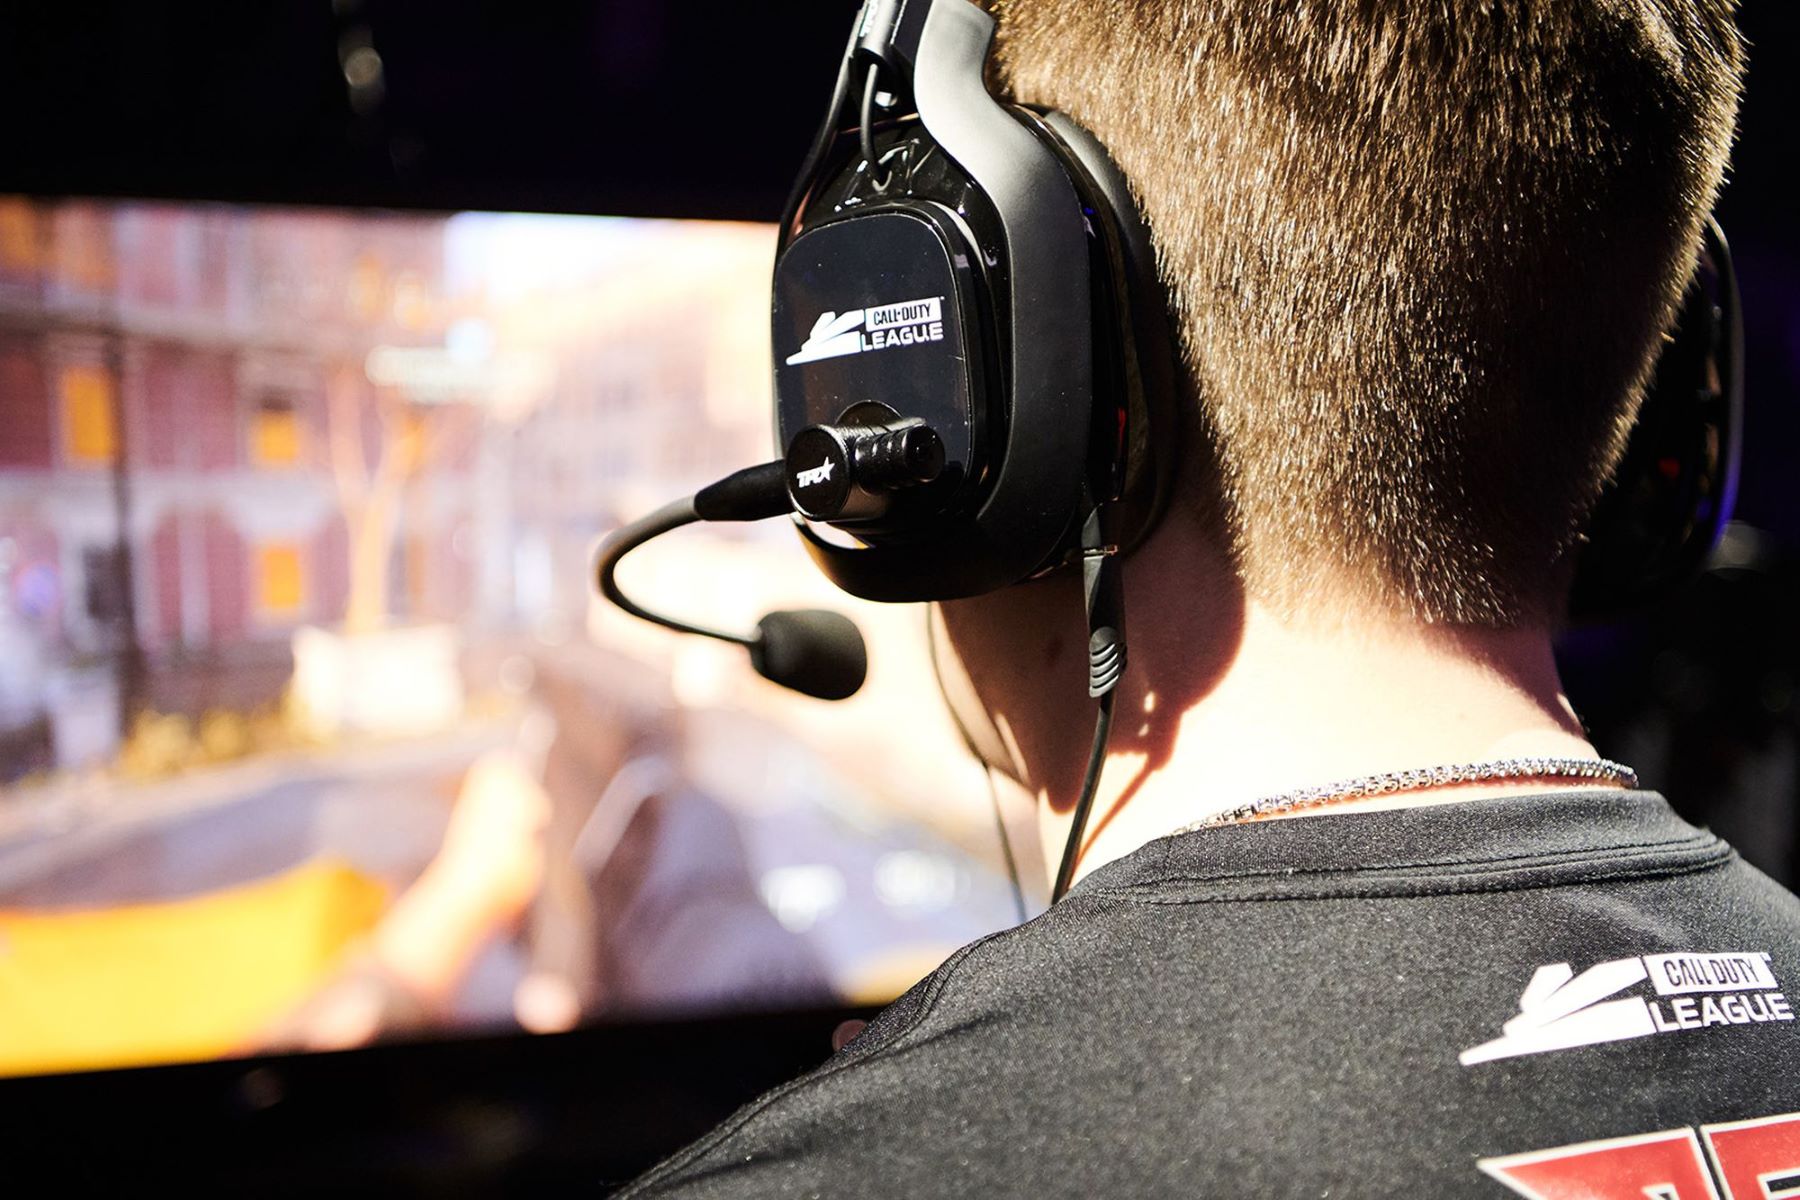 CDL Audio Choice: Exploring Headsets In The Call Of Duty League